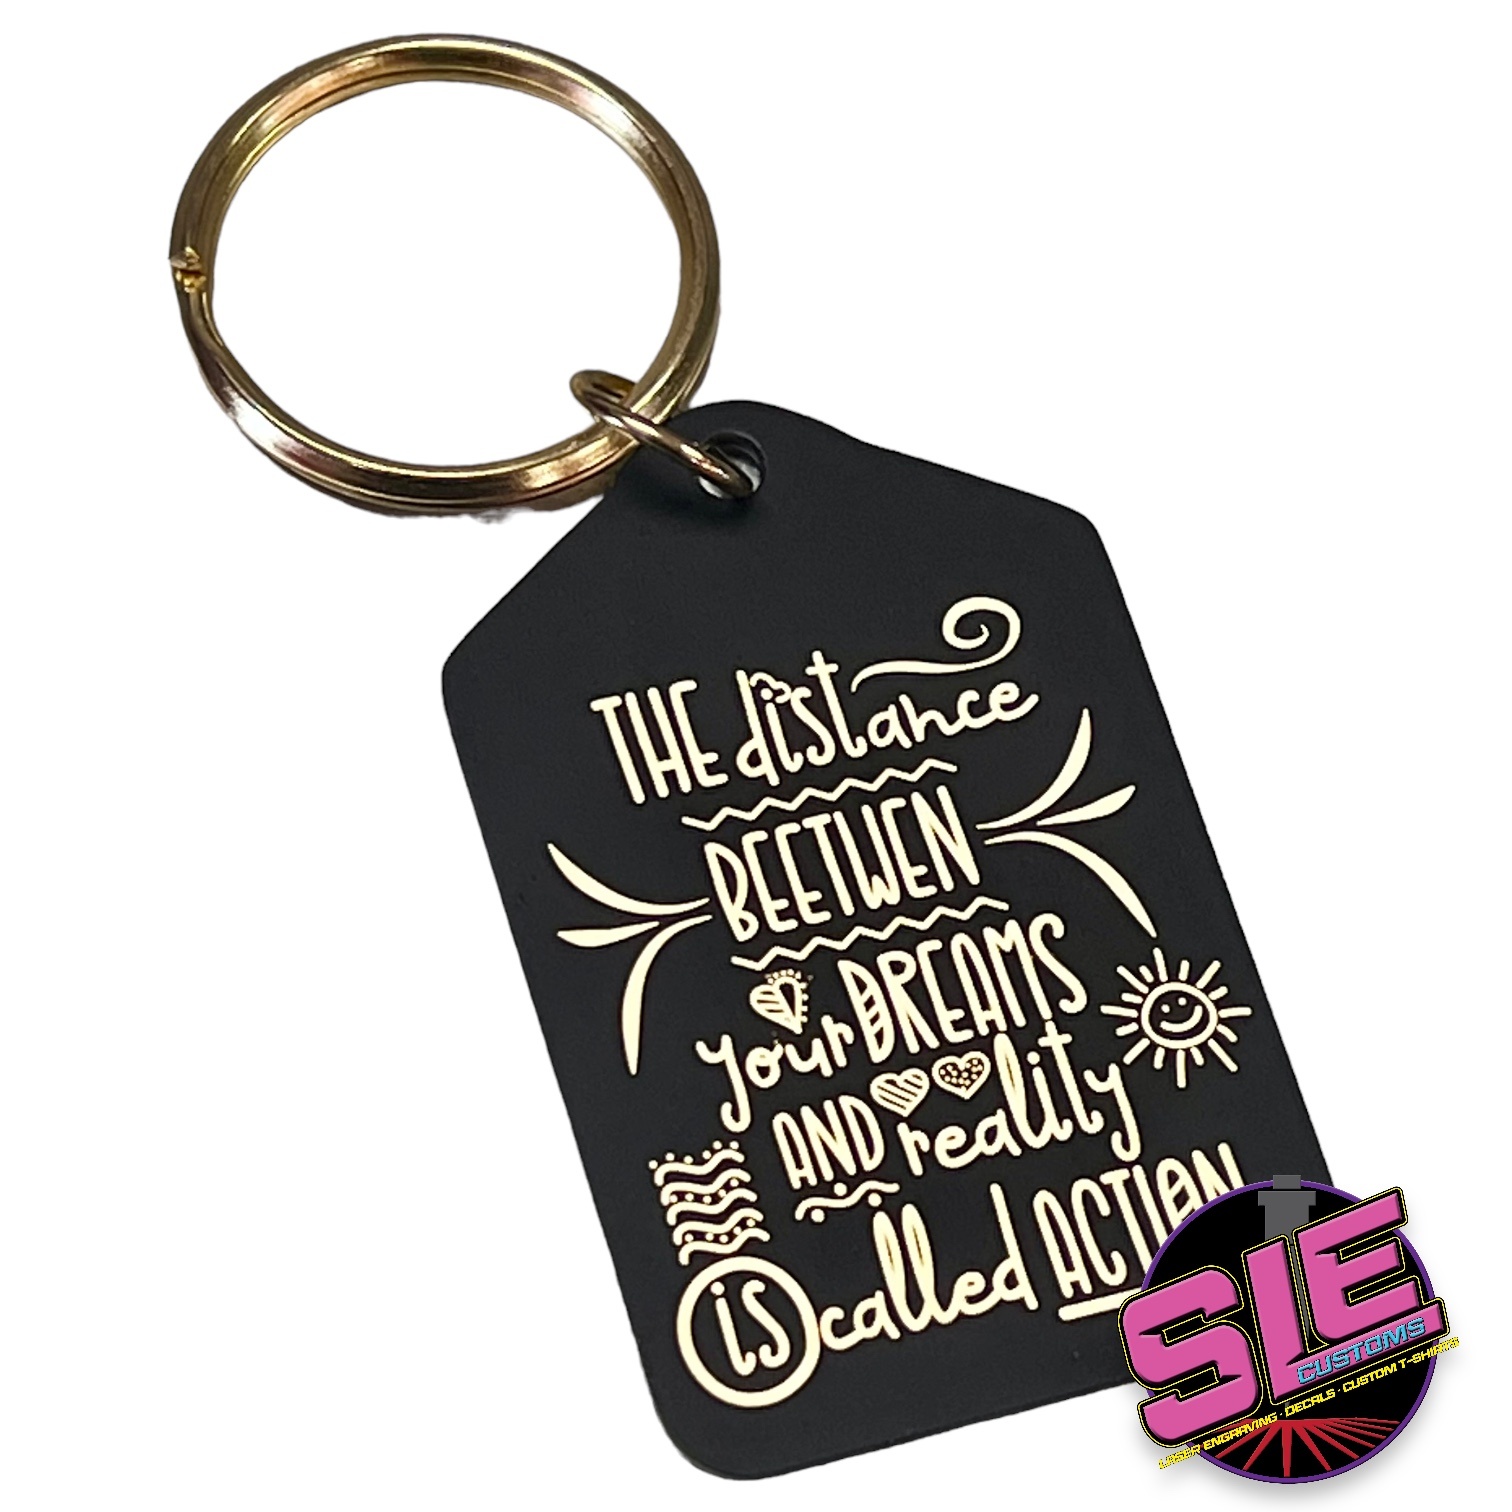 Customizable Key Chains: Personalize with Engraving or Full-Color Printing